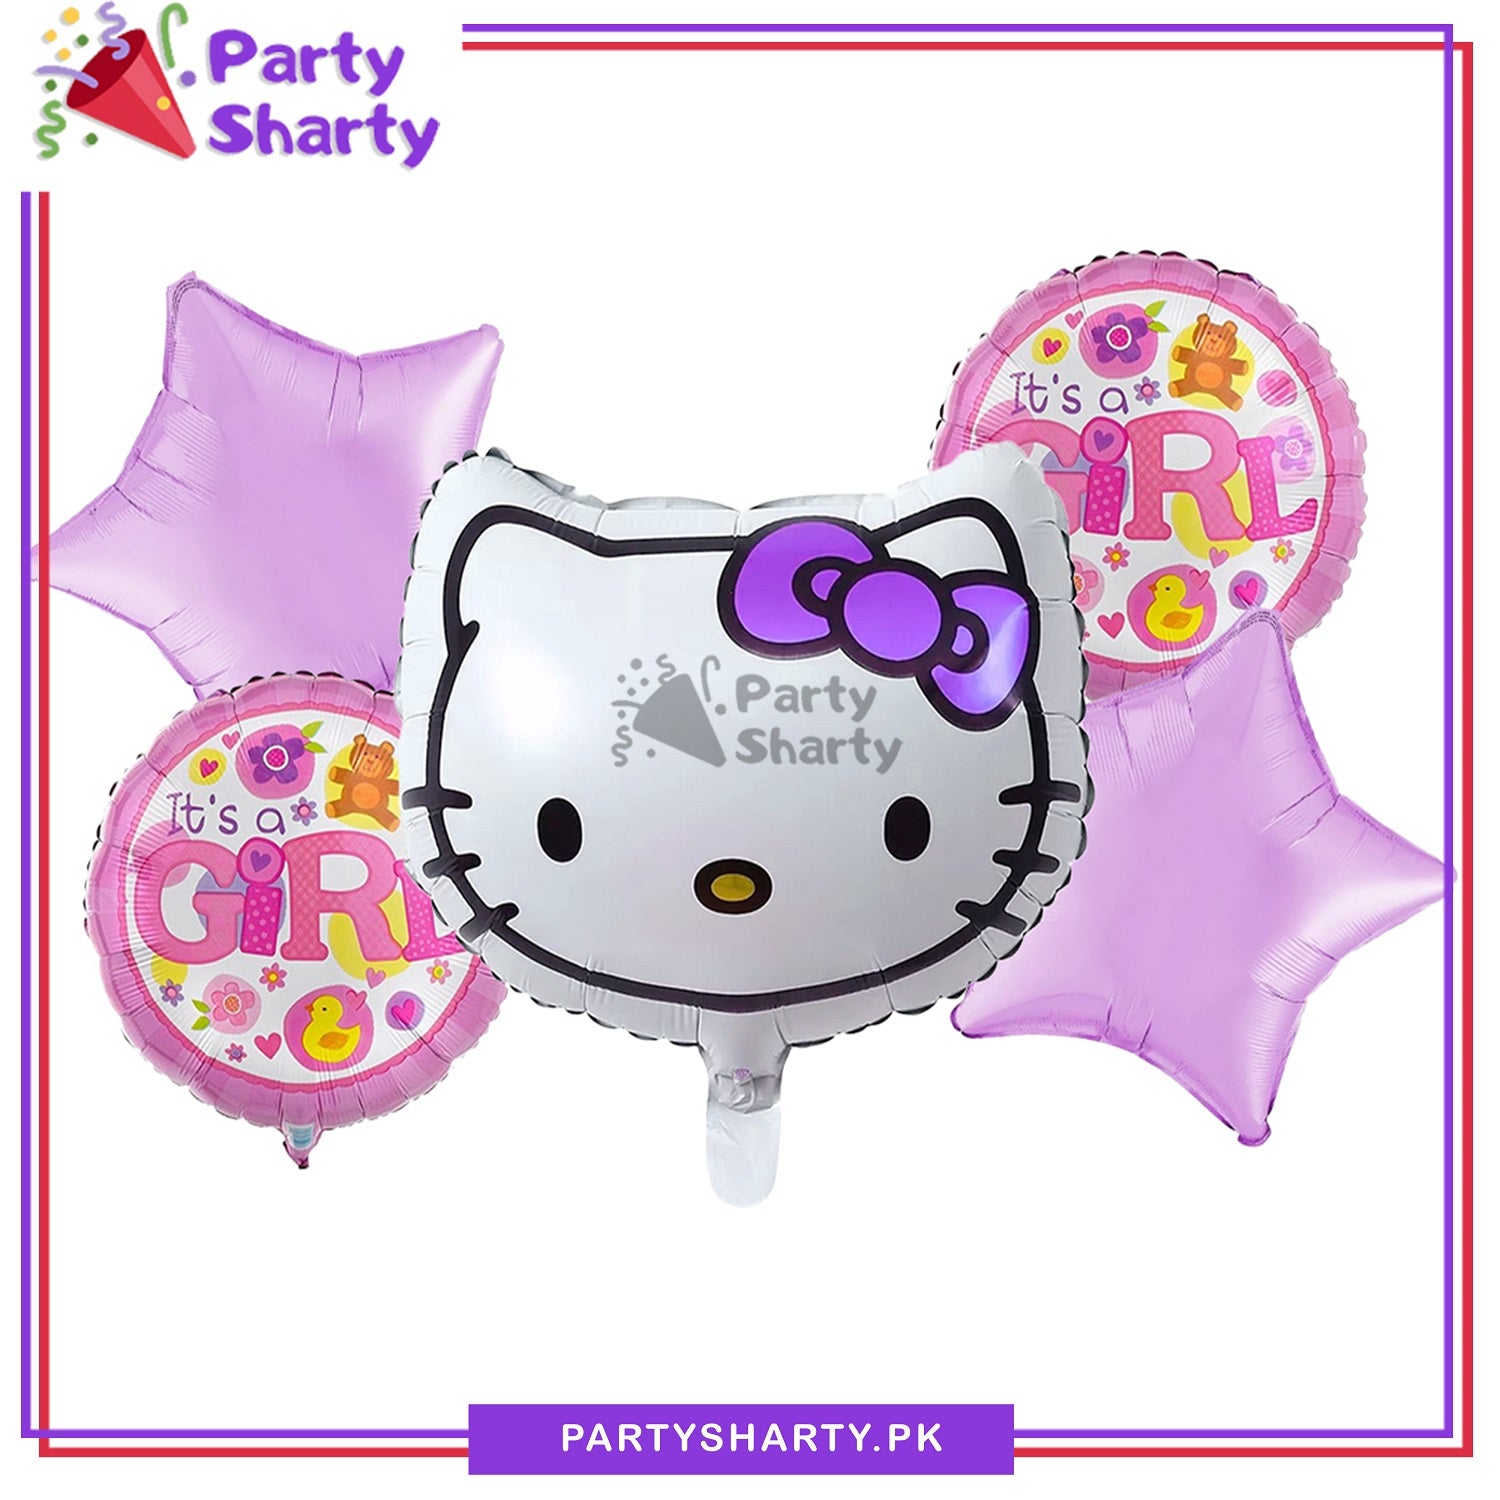 Hello Kitty Cartoon Head Shaped Foil Balloon Set - 5 Pieces For Hello Kitty Theme Party and Decoration